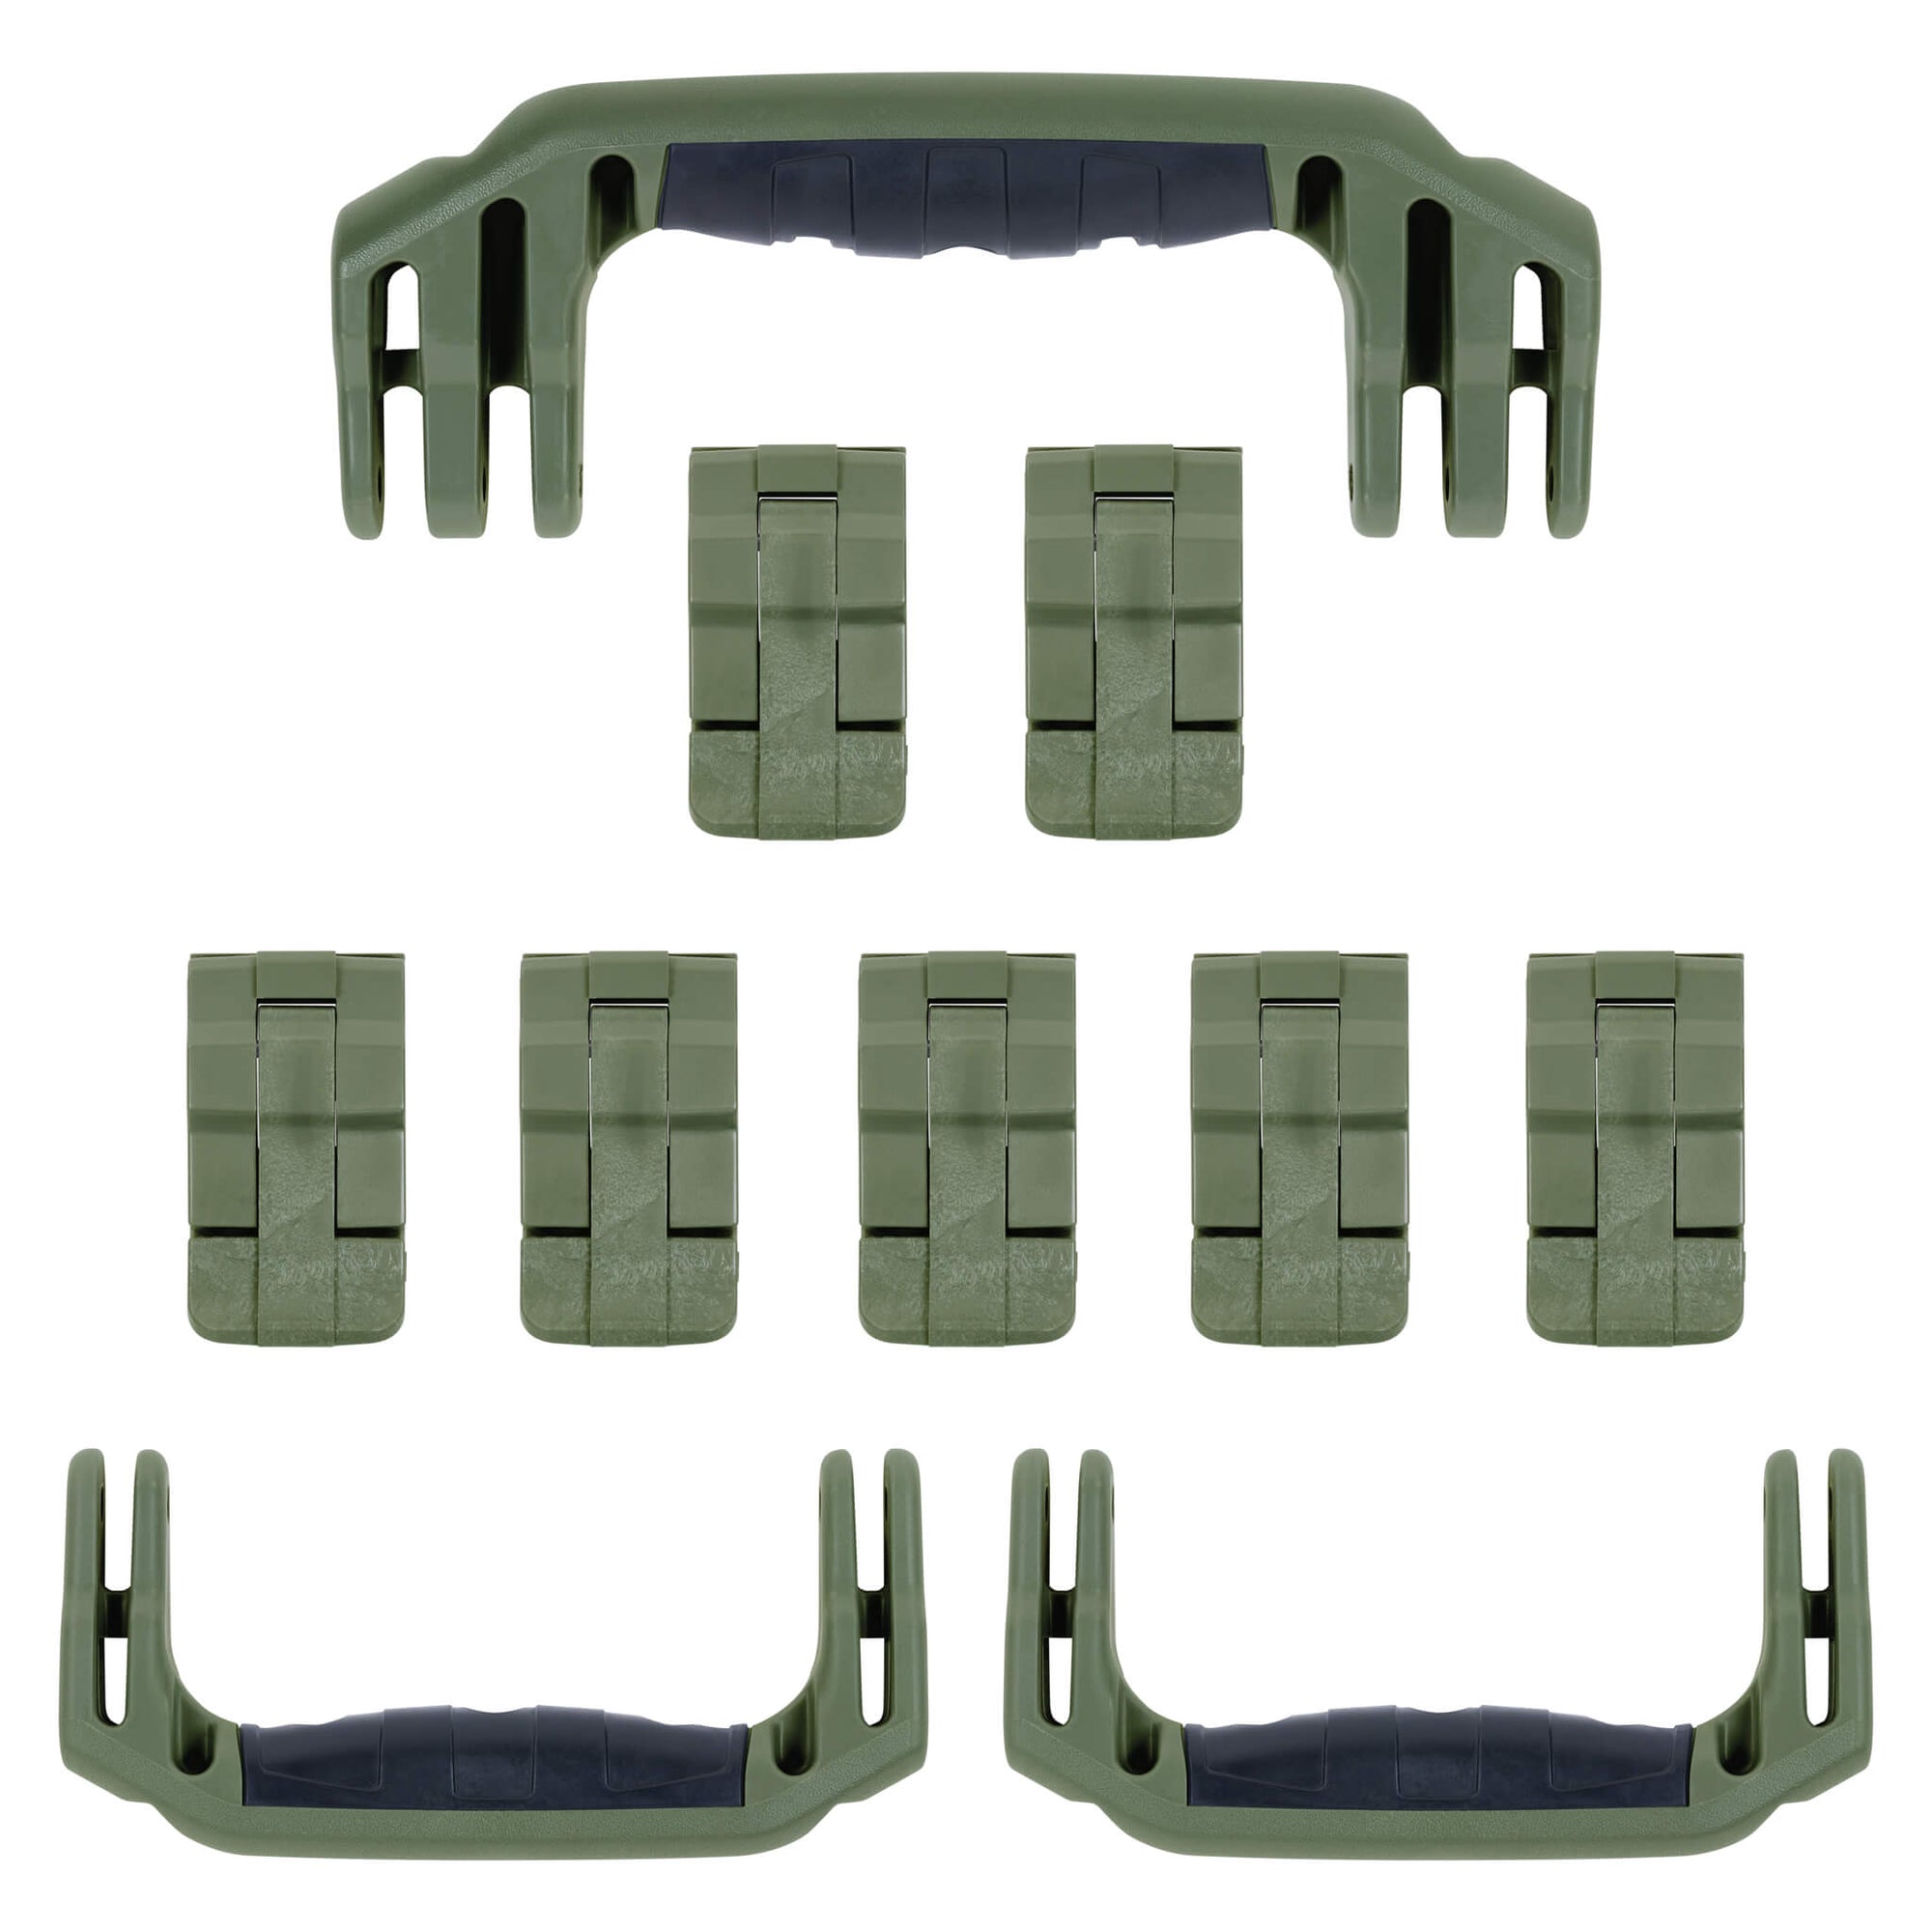 Pelican 1650 Replacement Handles & Latches, OD Green (Set of 3 Handles, 7 Latches) ColorCase 